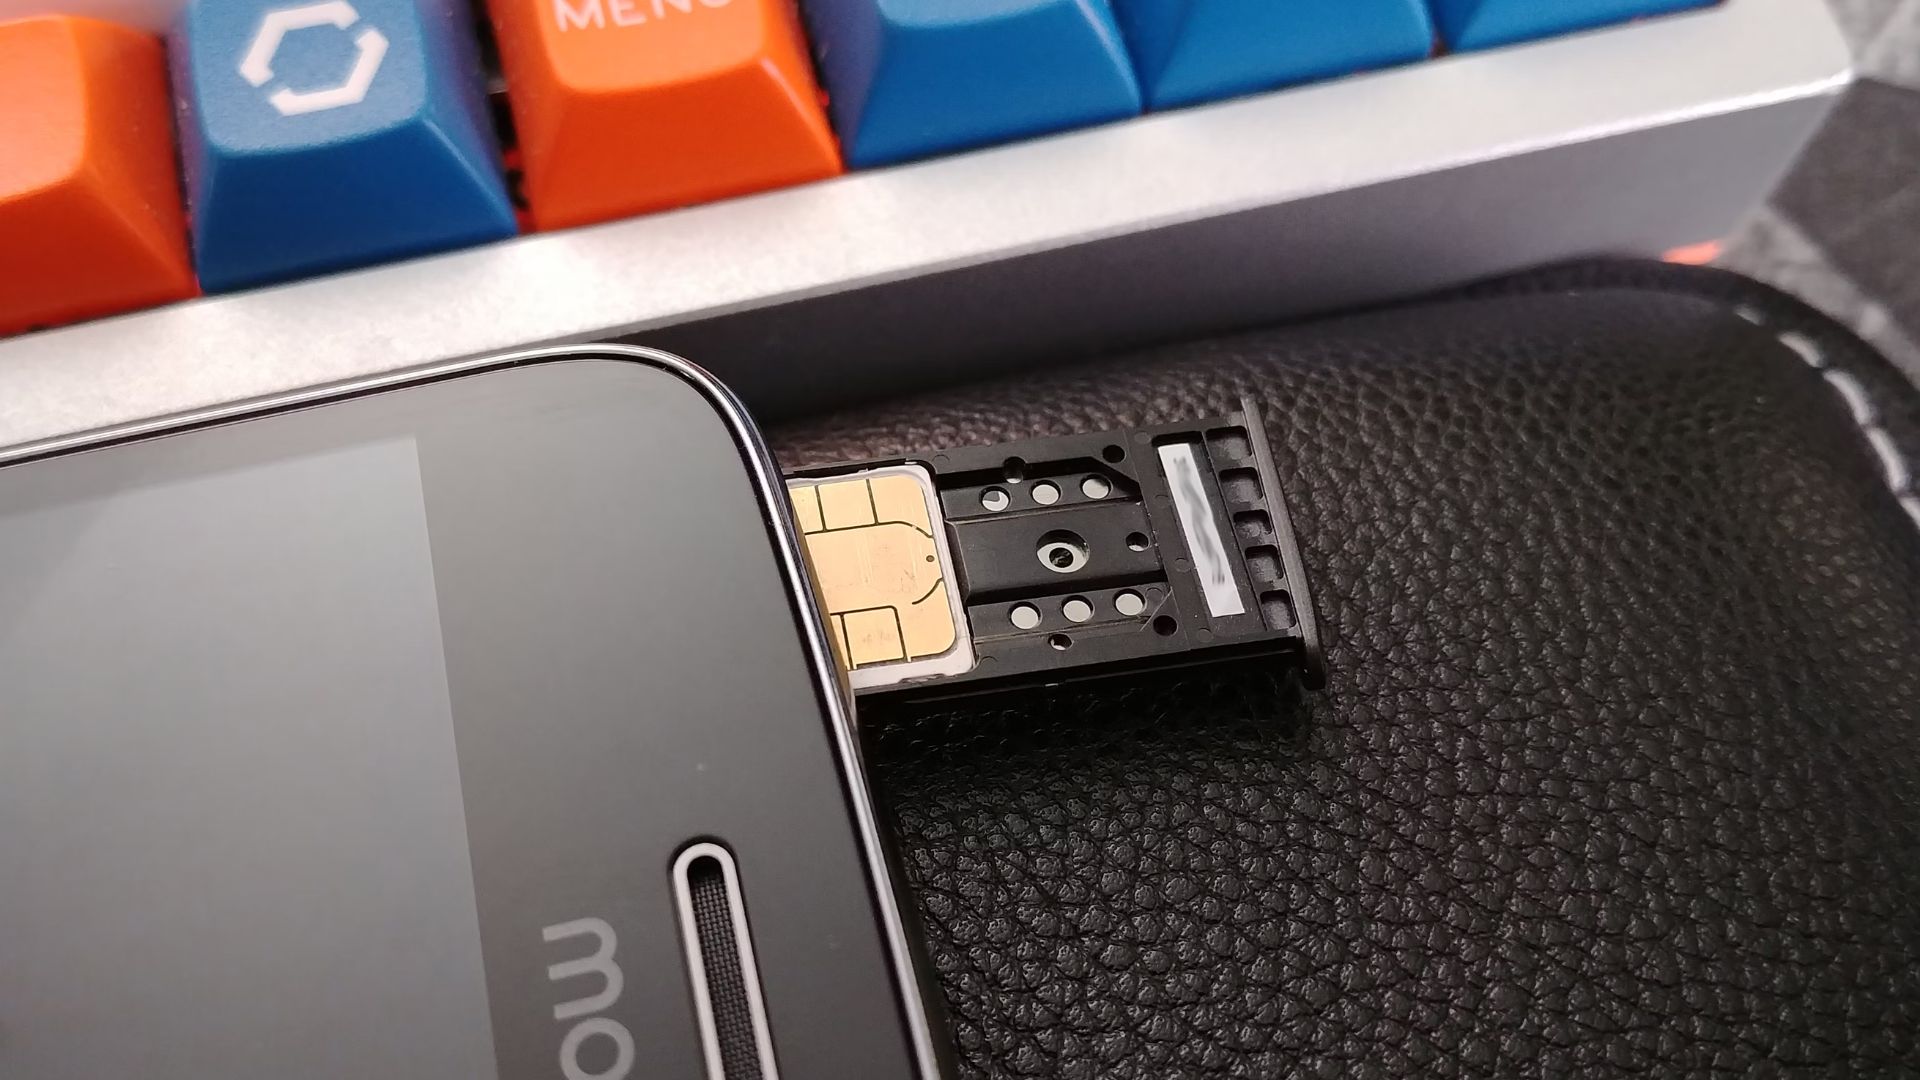 Safely Extracting SIM Card From Moto X